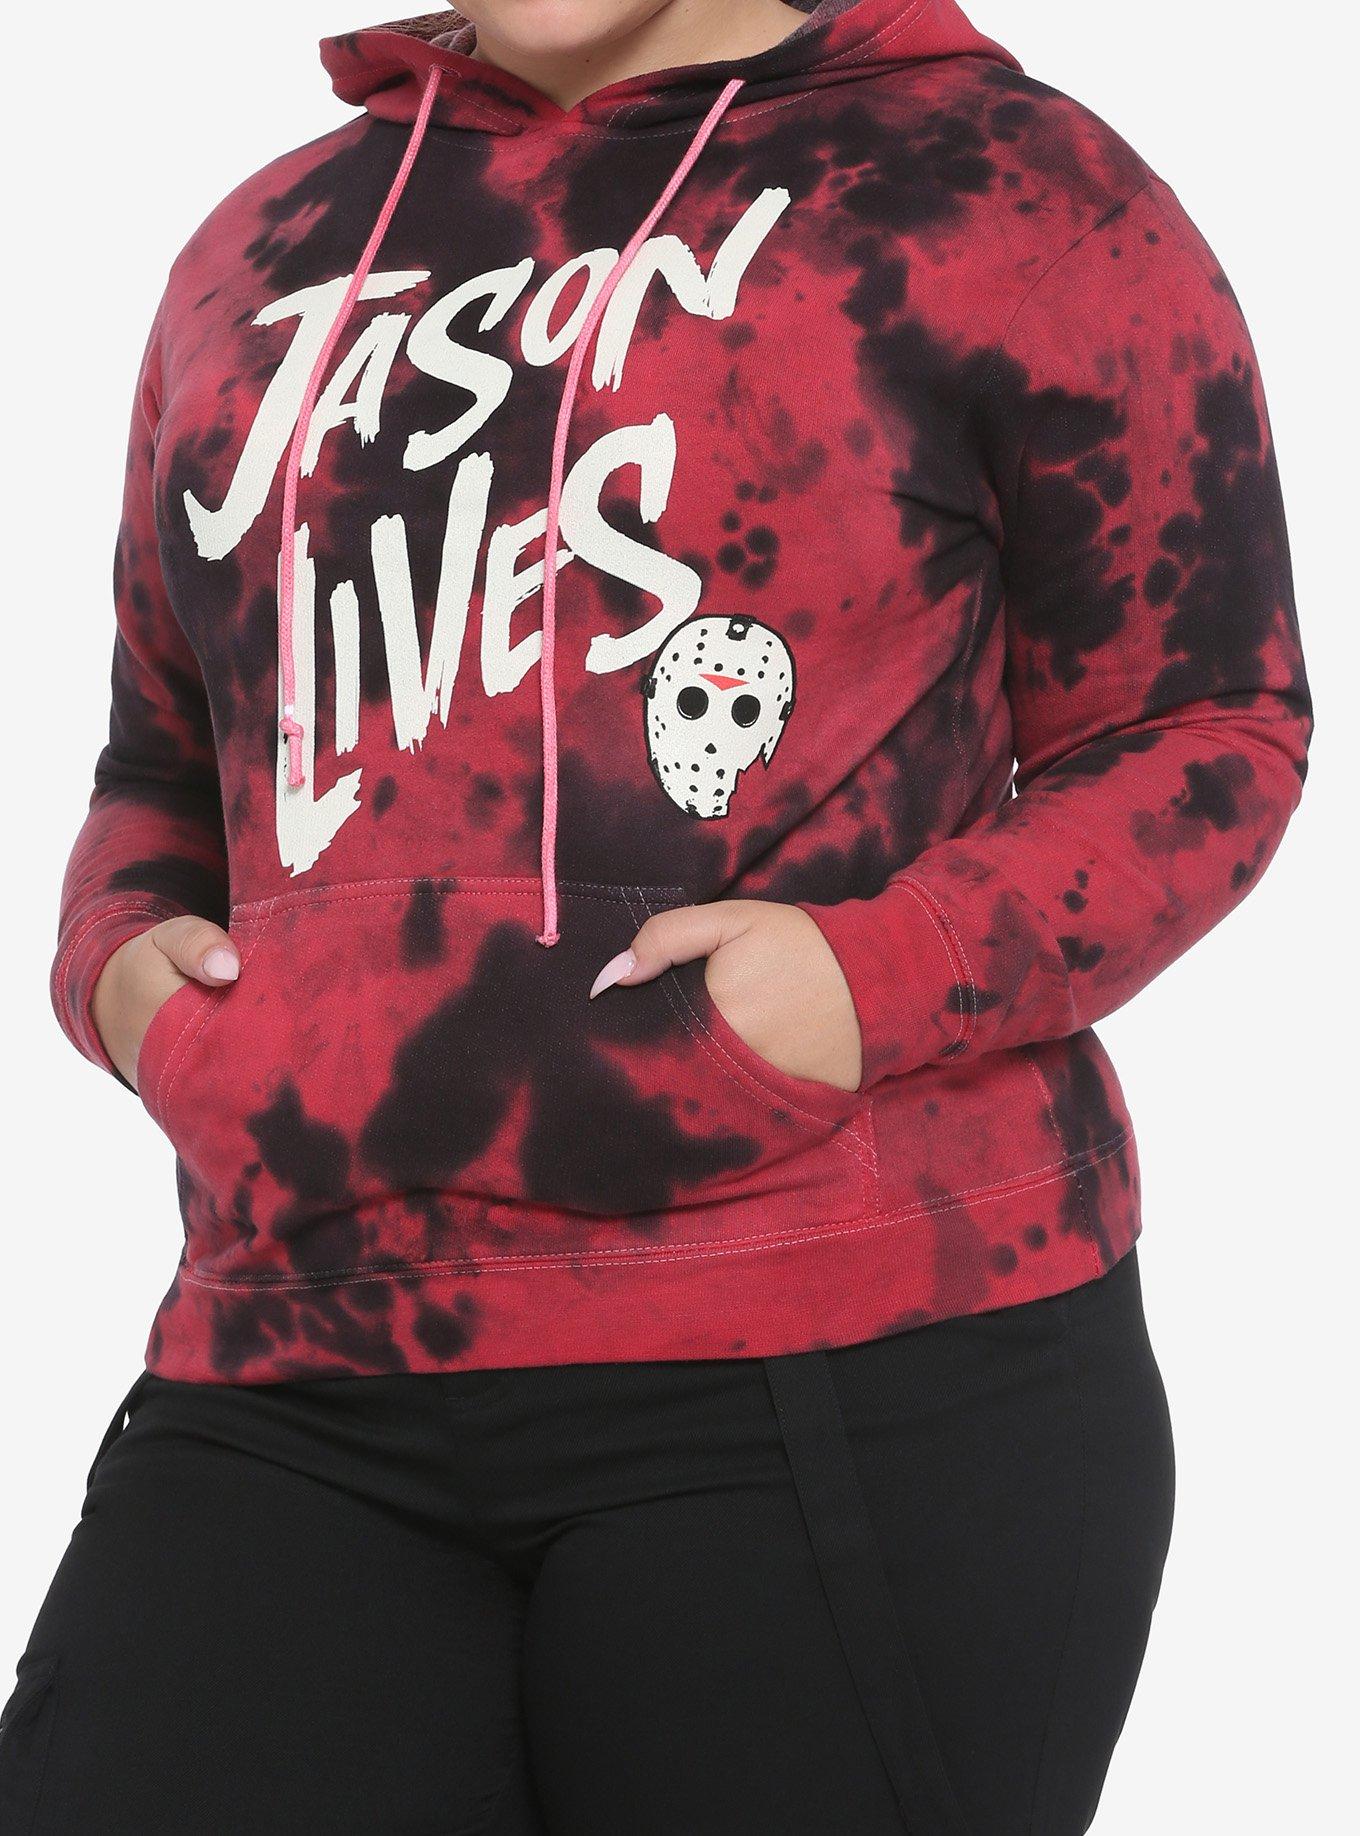 Friday The 13th Jason Lives Tie-Dye Girls Hoodie Plus Size, WHITE, hi-res